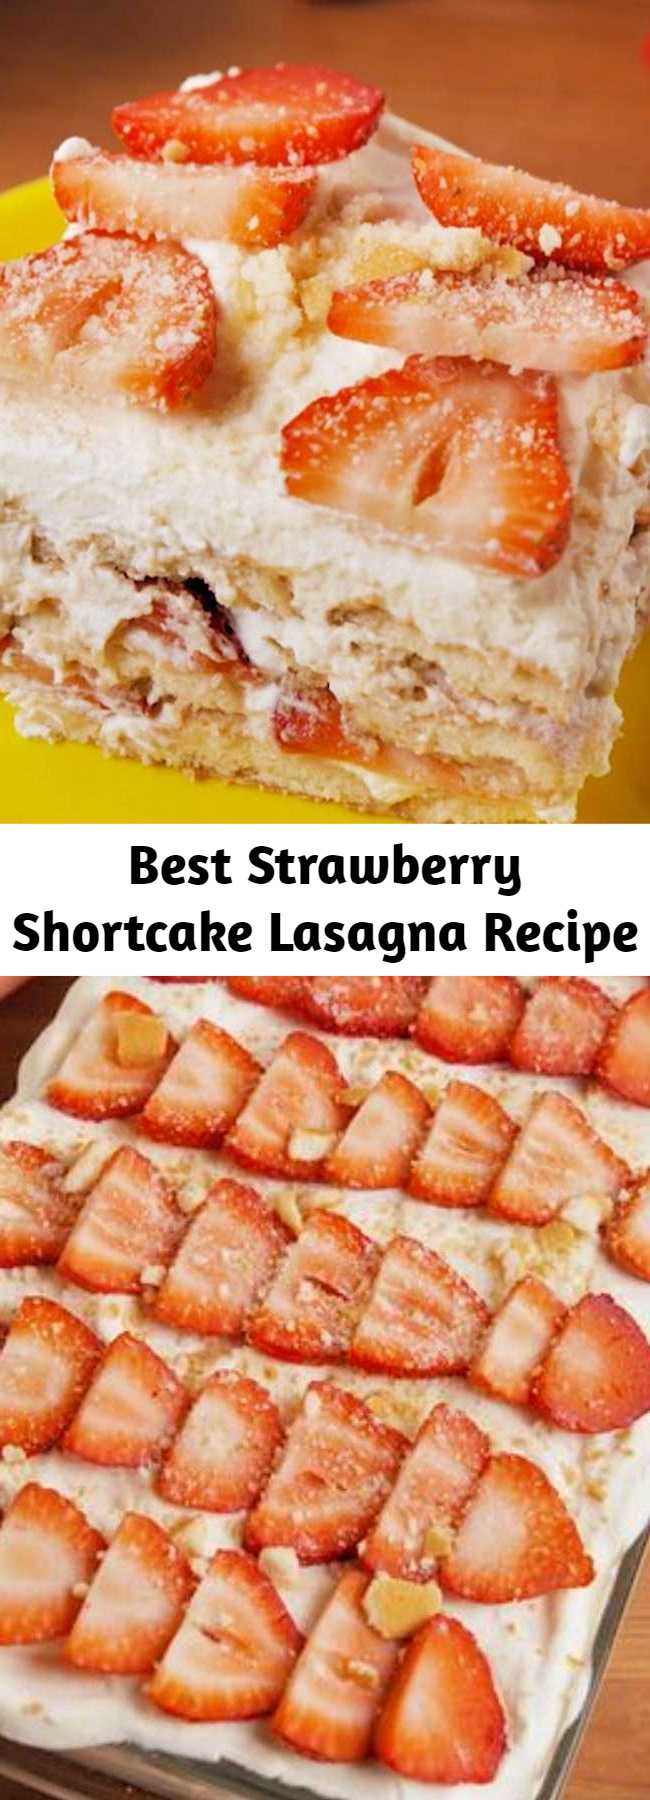 Best Strawberry Shortcake Lasagna Recipe - Easy to make, hard to resist. This no-bake Strawberry Shortcake Lasagna is all you need for your springtime party. #easy #recipe #nobake #dessert #dessertrecipe #strawberryshortcake #dessertlasagna #lasagna #nillawafers #coolwhip